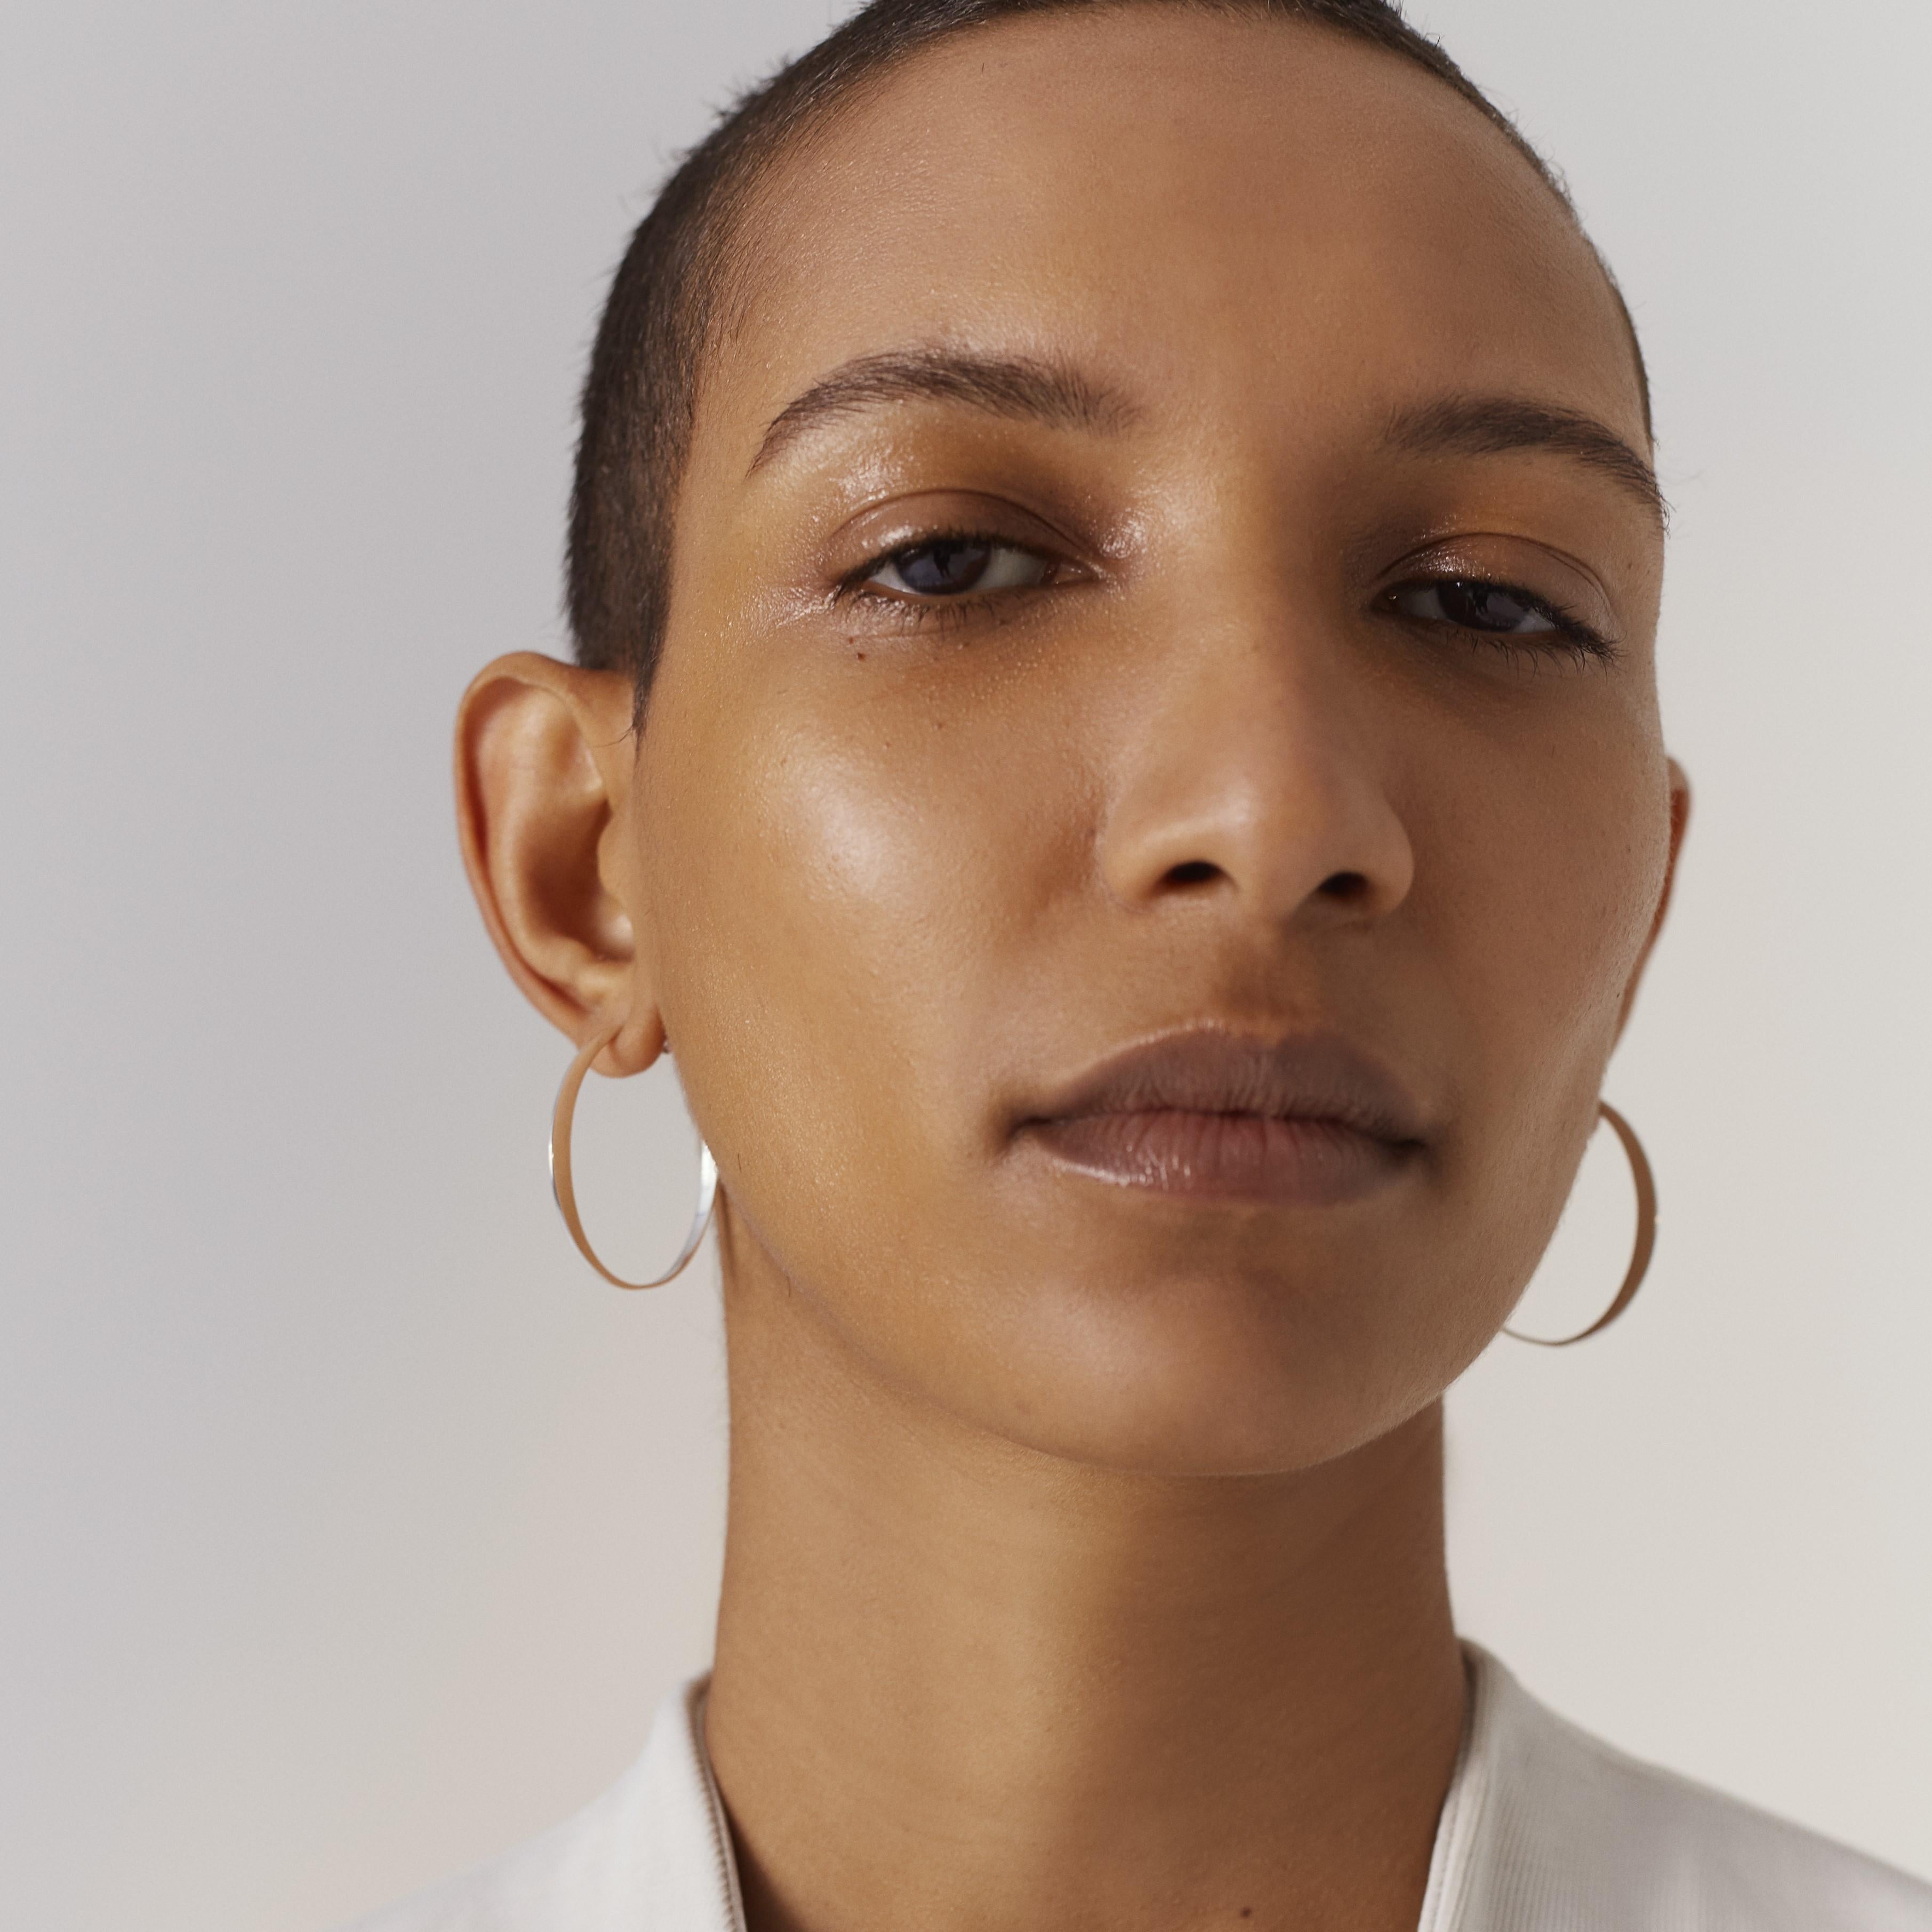 Also available in recycled 18k gold; as a pair, or in size small and large.

Introducing the medium GLOW hoop earring, a stunning piece of Danish design crafted in Copenhagen. This architectural earring is handcrafted using recycled sterling silver,